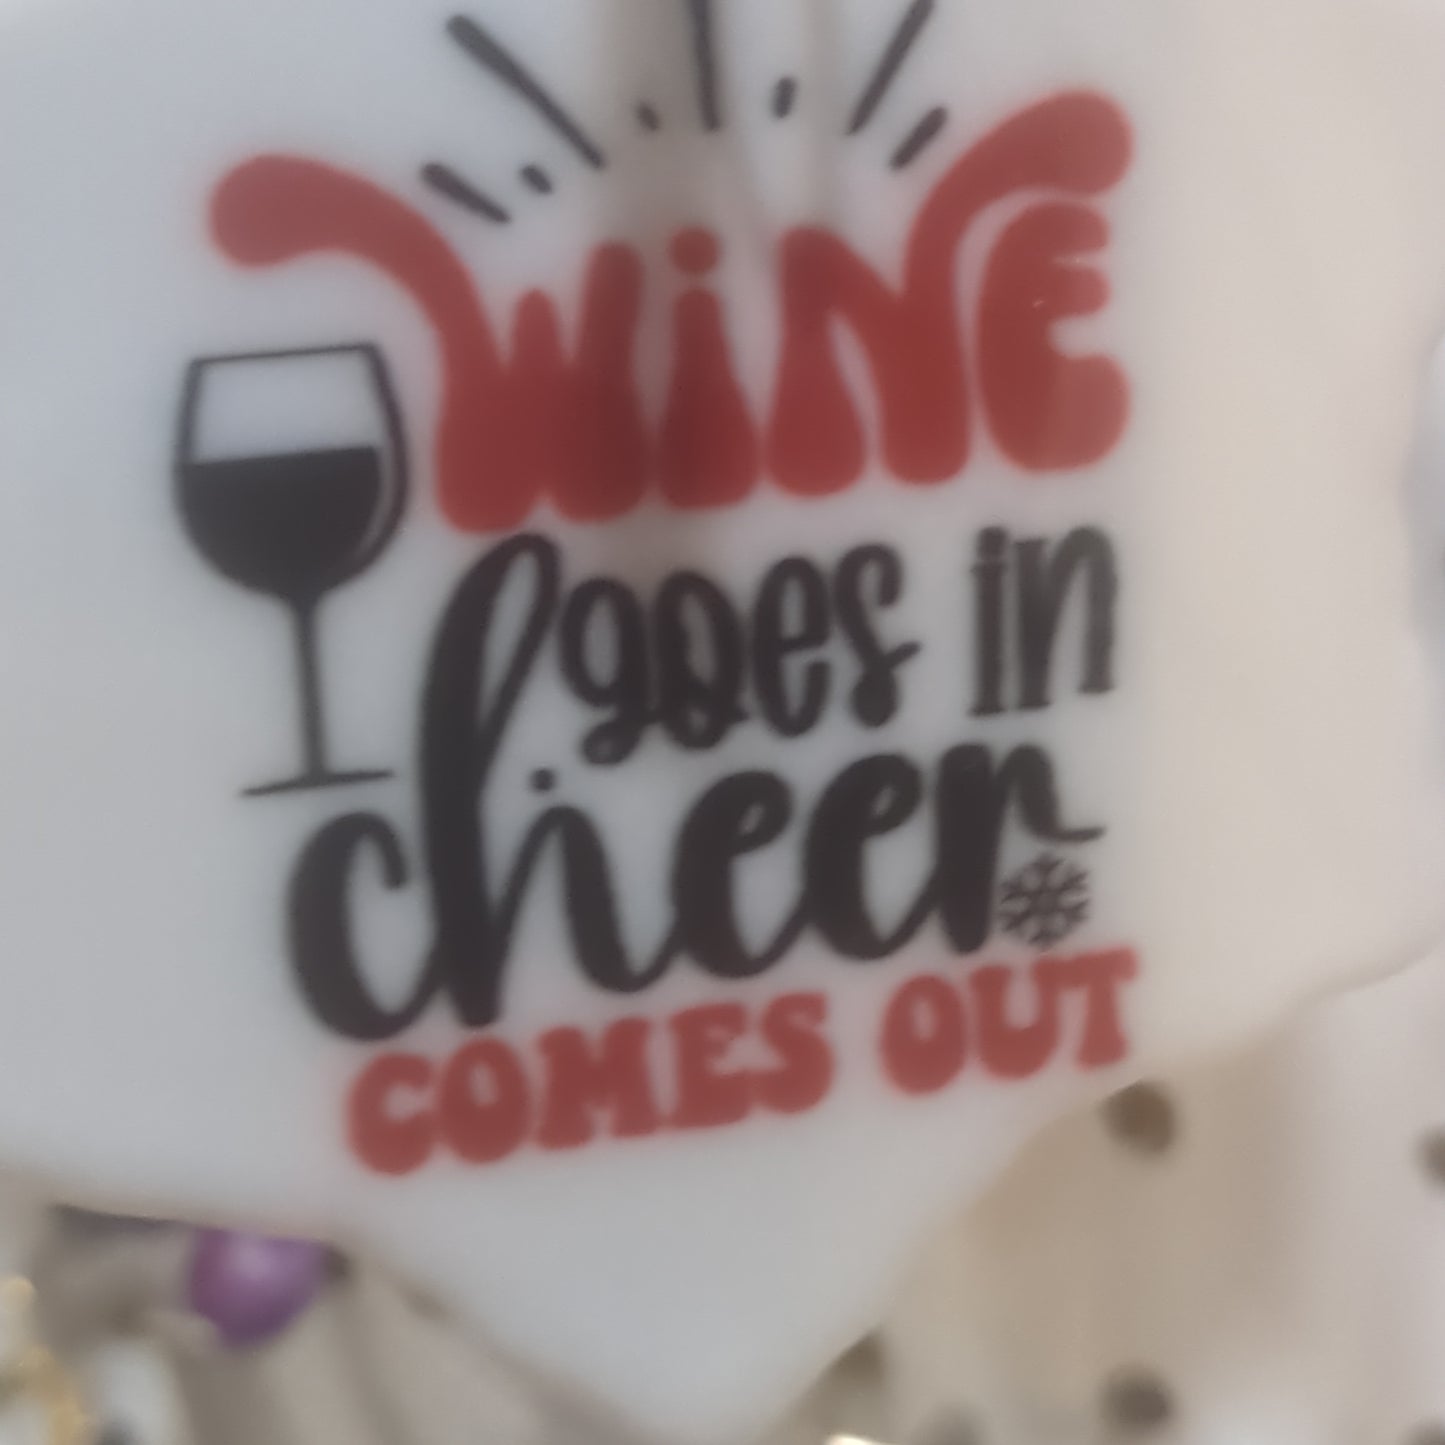 Ceramic wine ornament. Wine goes in cheer comes out